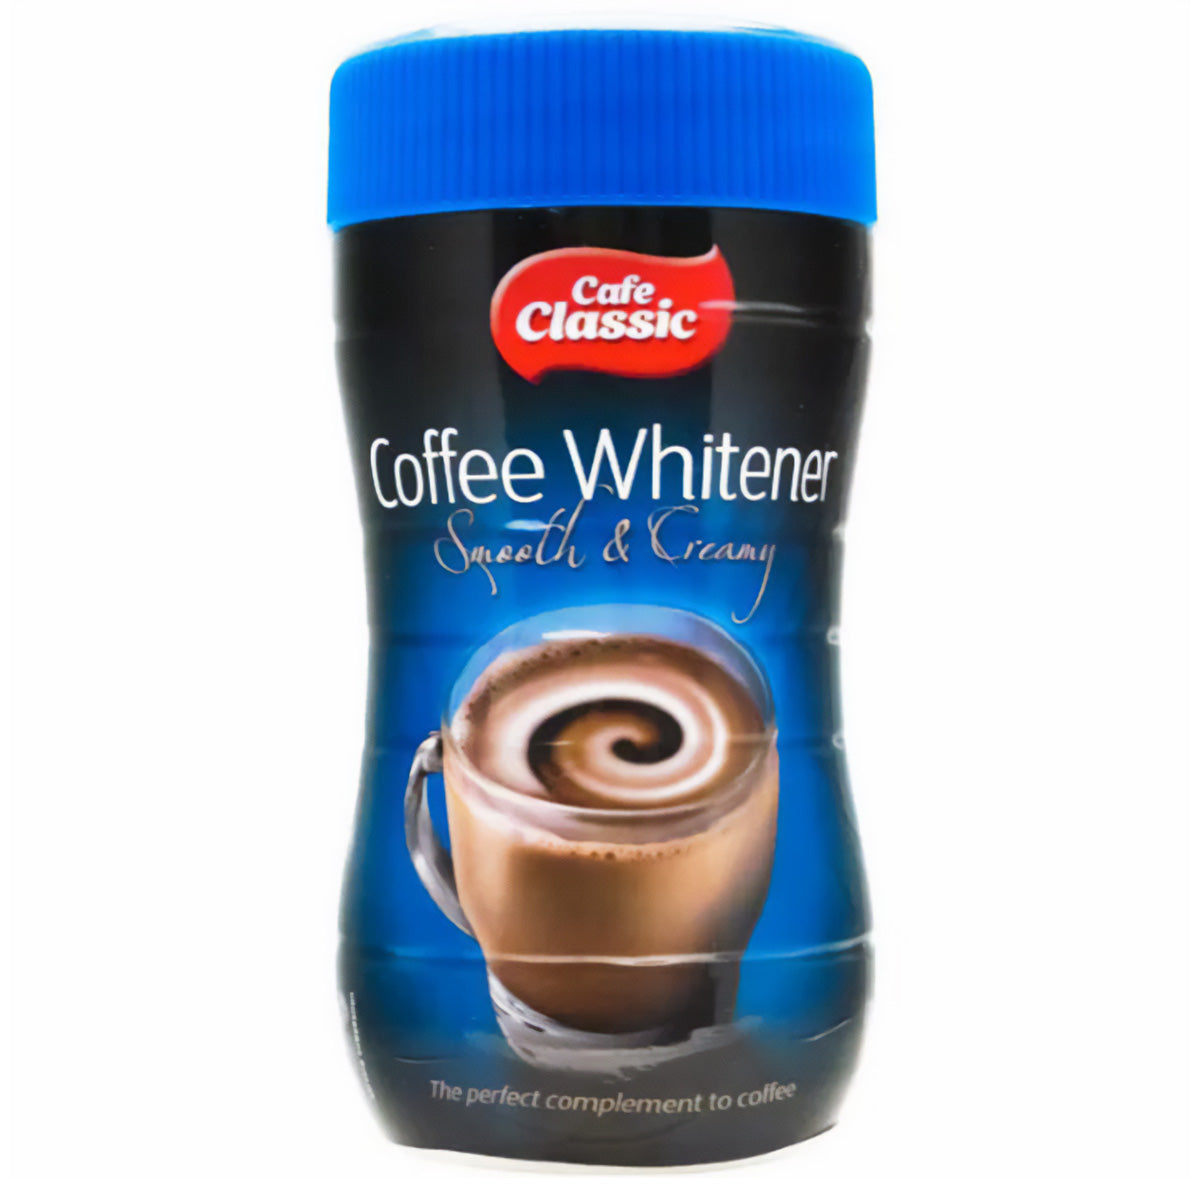 Cafe Classic - Coffee Whitener - 400g - Continental Food Store